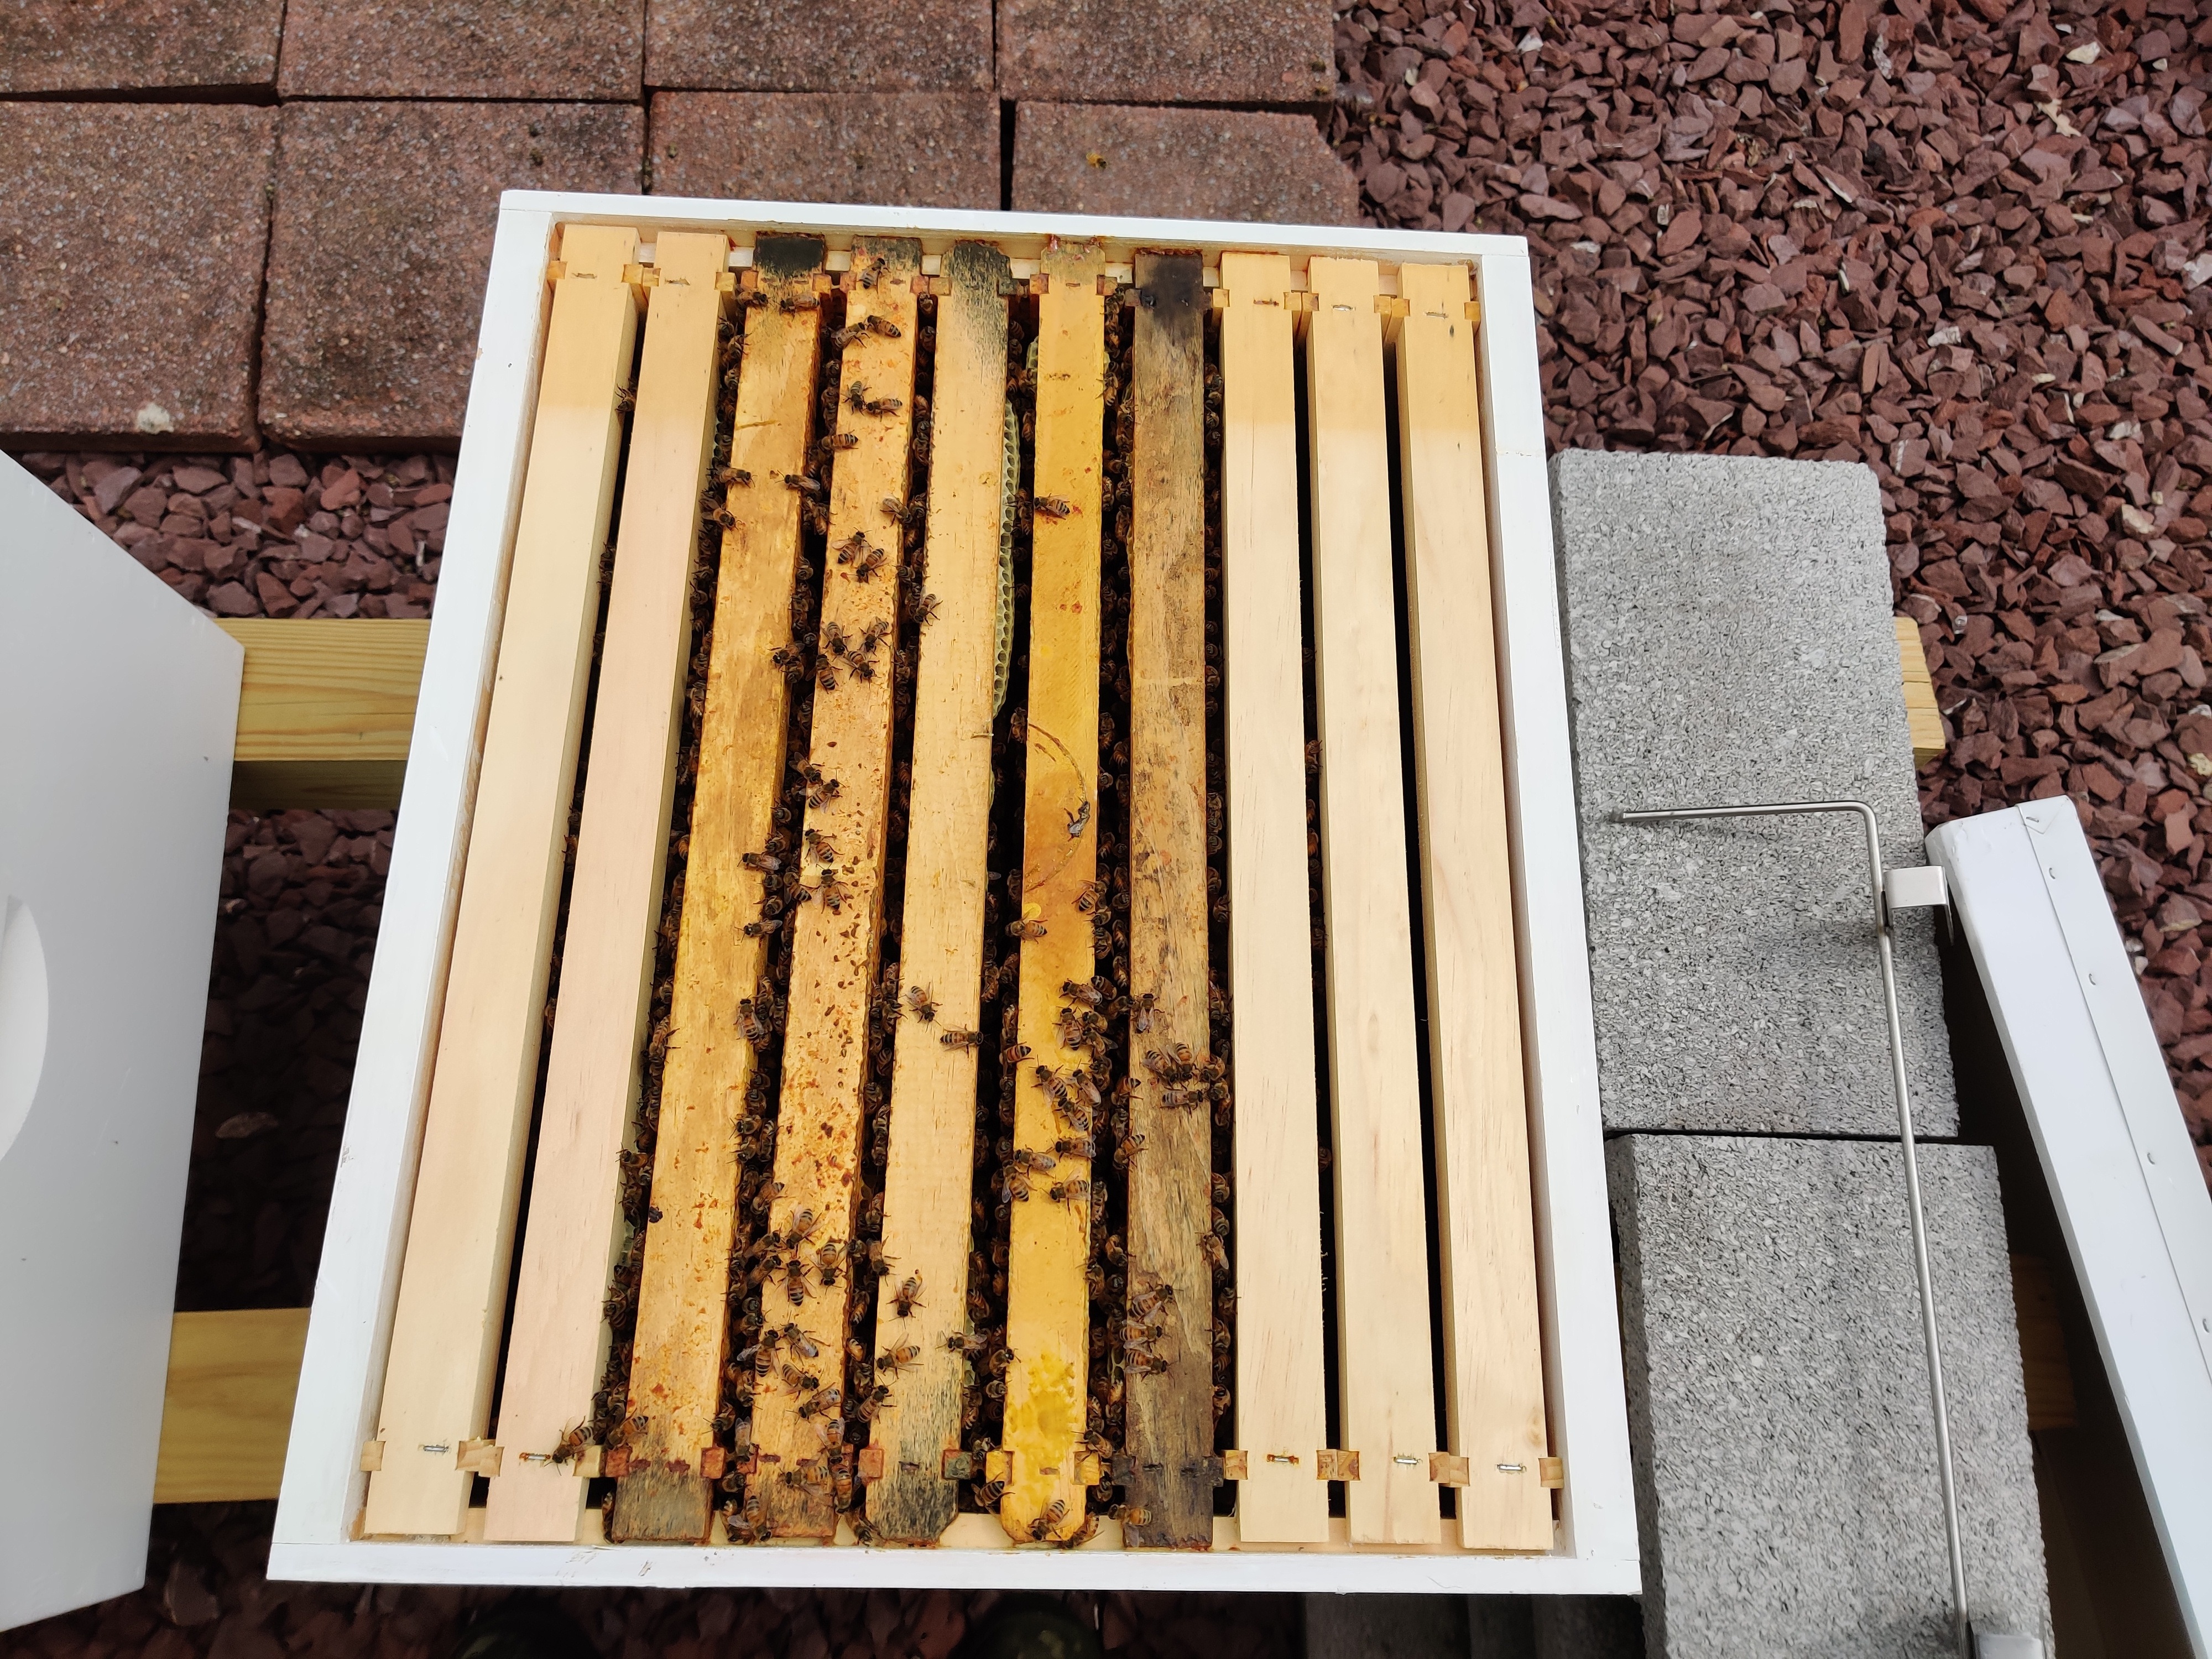 5 frame nucleus hive installed into a 10 frame langstroth hive.